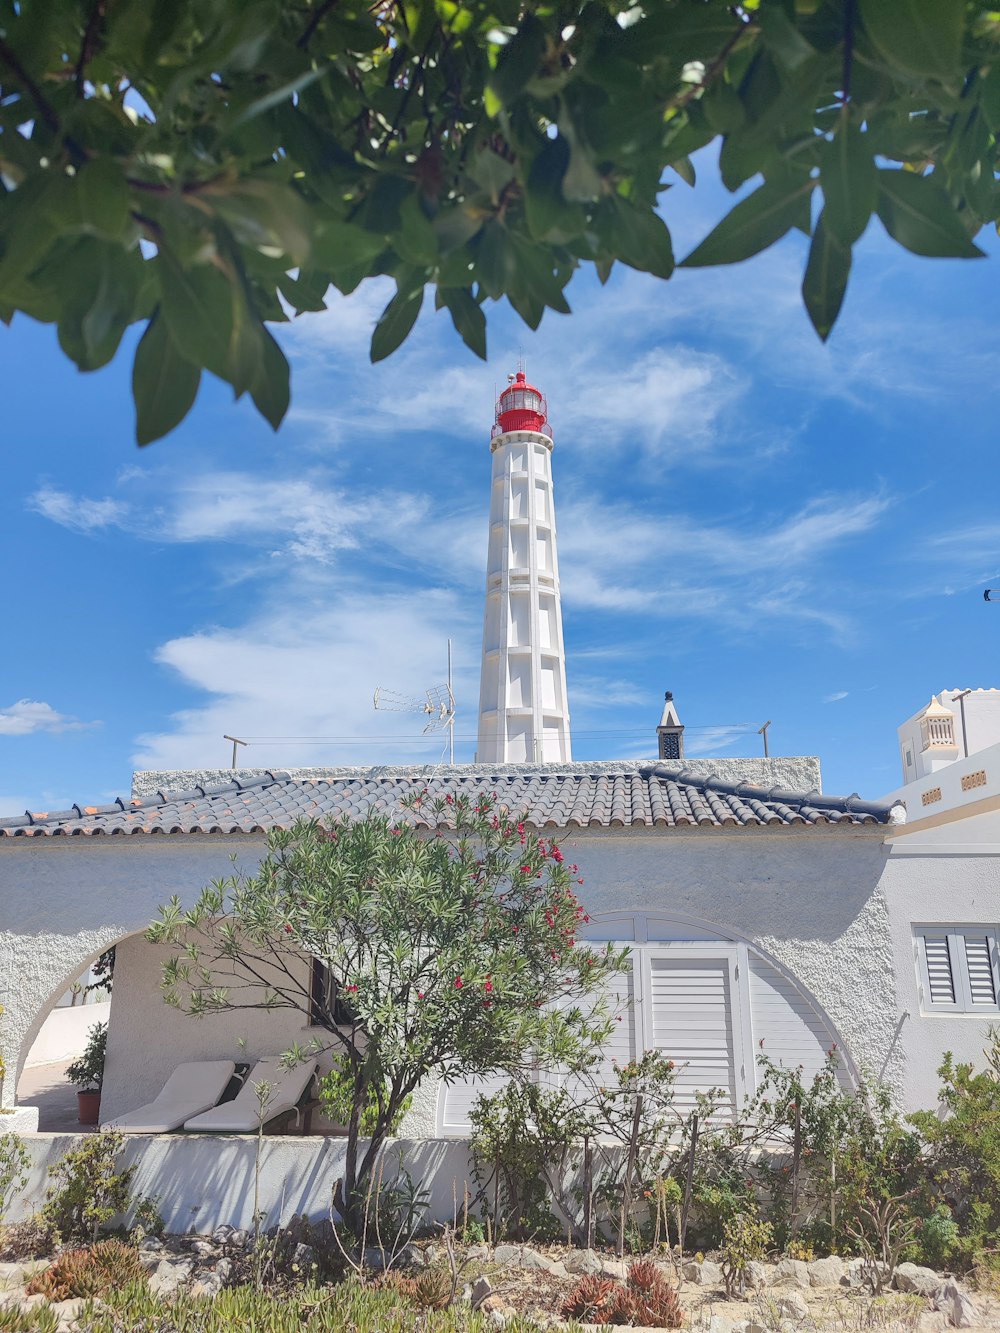 white and red lighthouse near white concrete building under blue sky during daytime